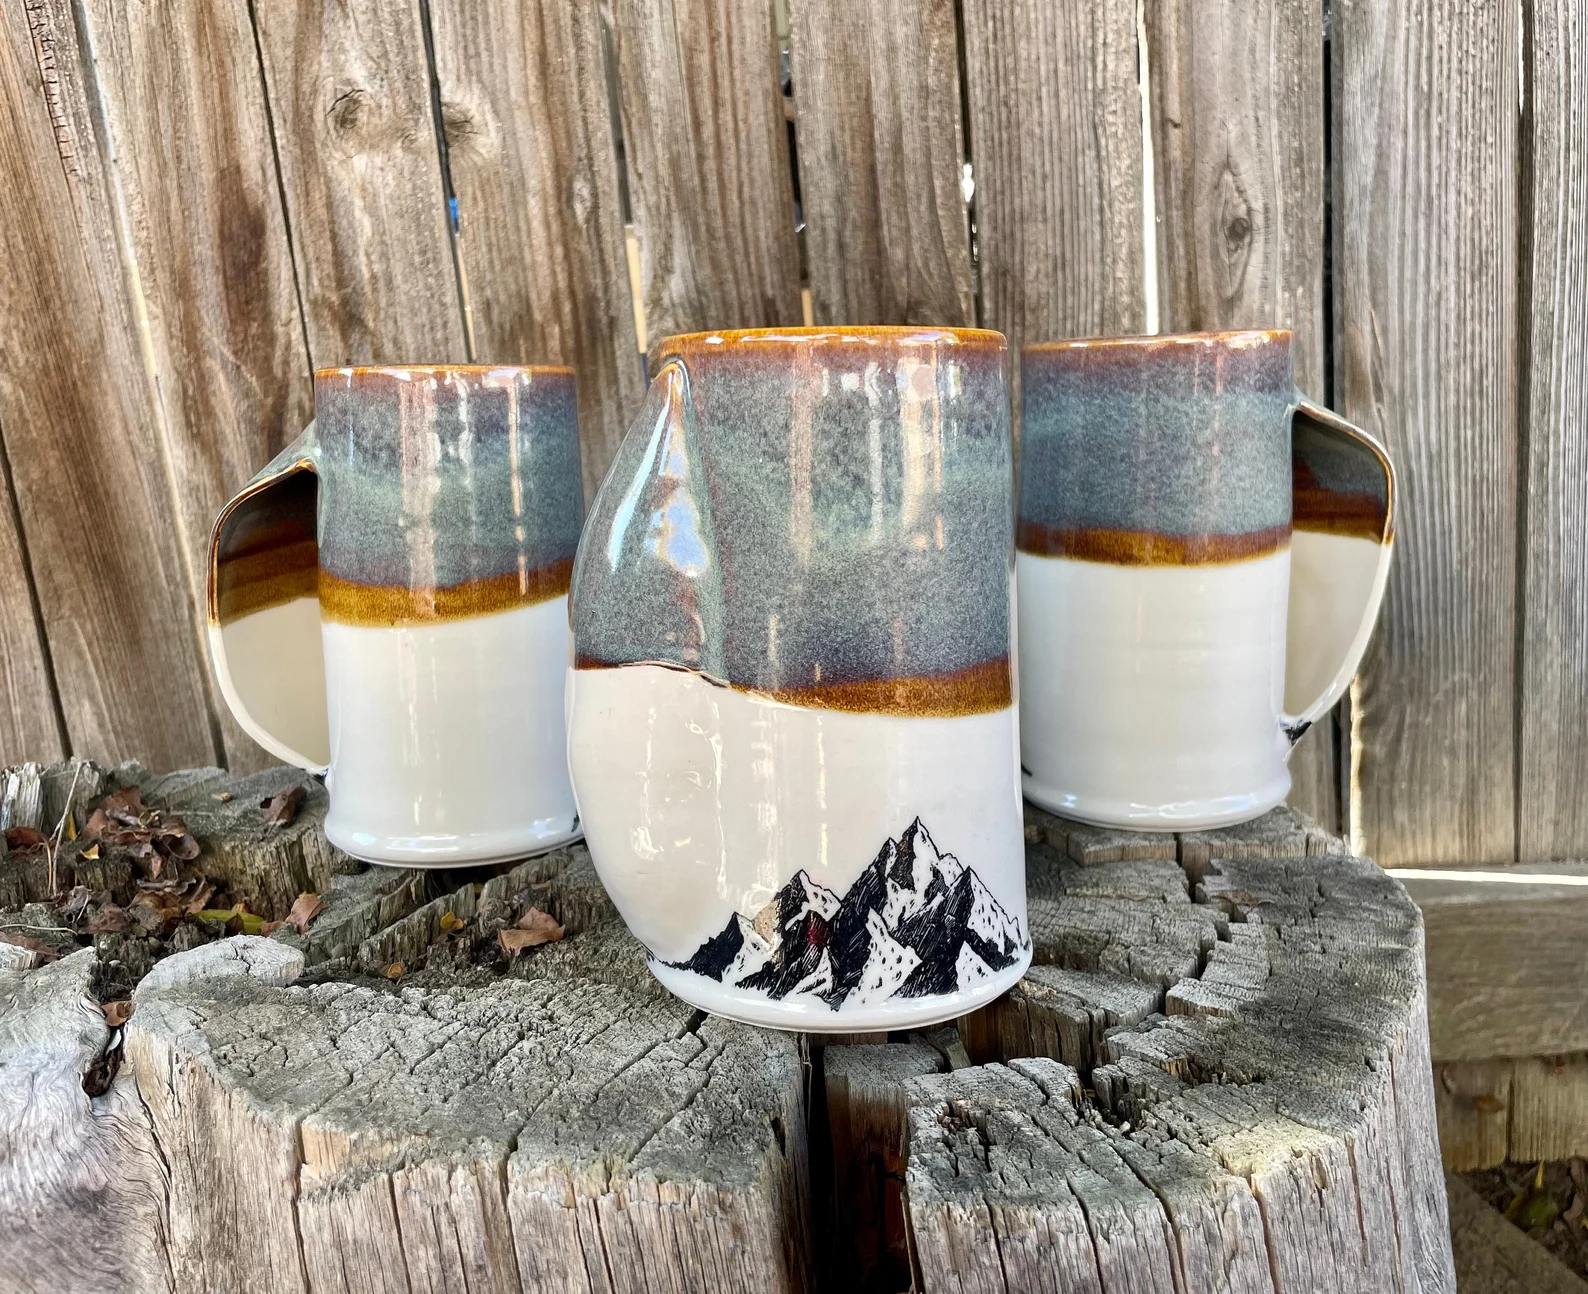 A photo of three mugs with a pocket handle with a blue top half and a white bottom half. The image of black mountains is on the bottom half of the mug. The mugs are staged on a wooden stump.